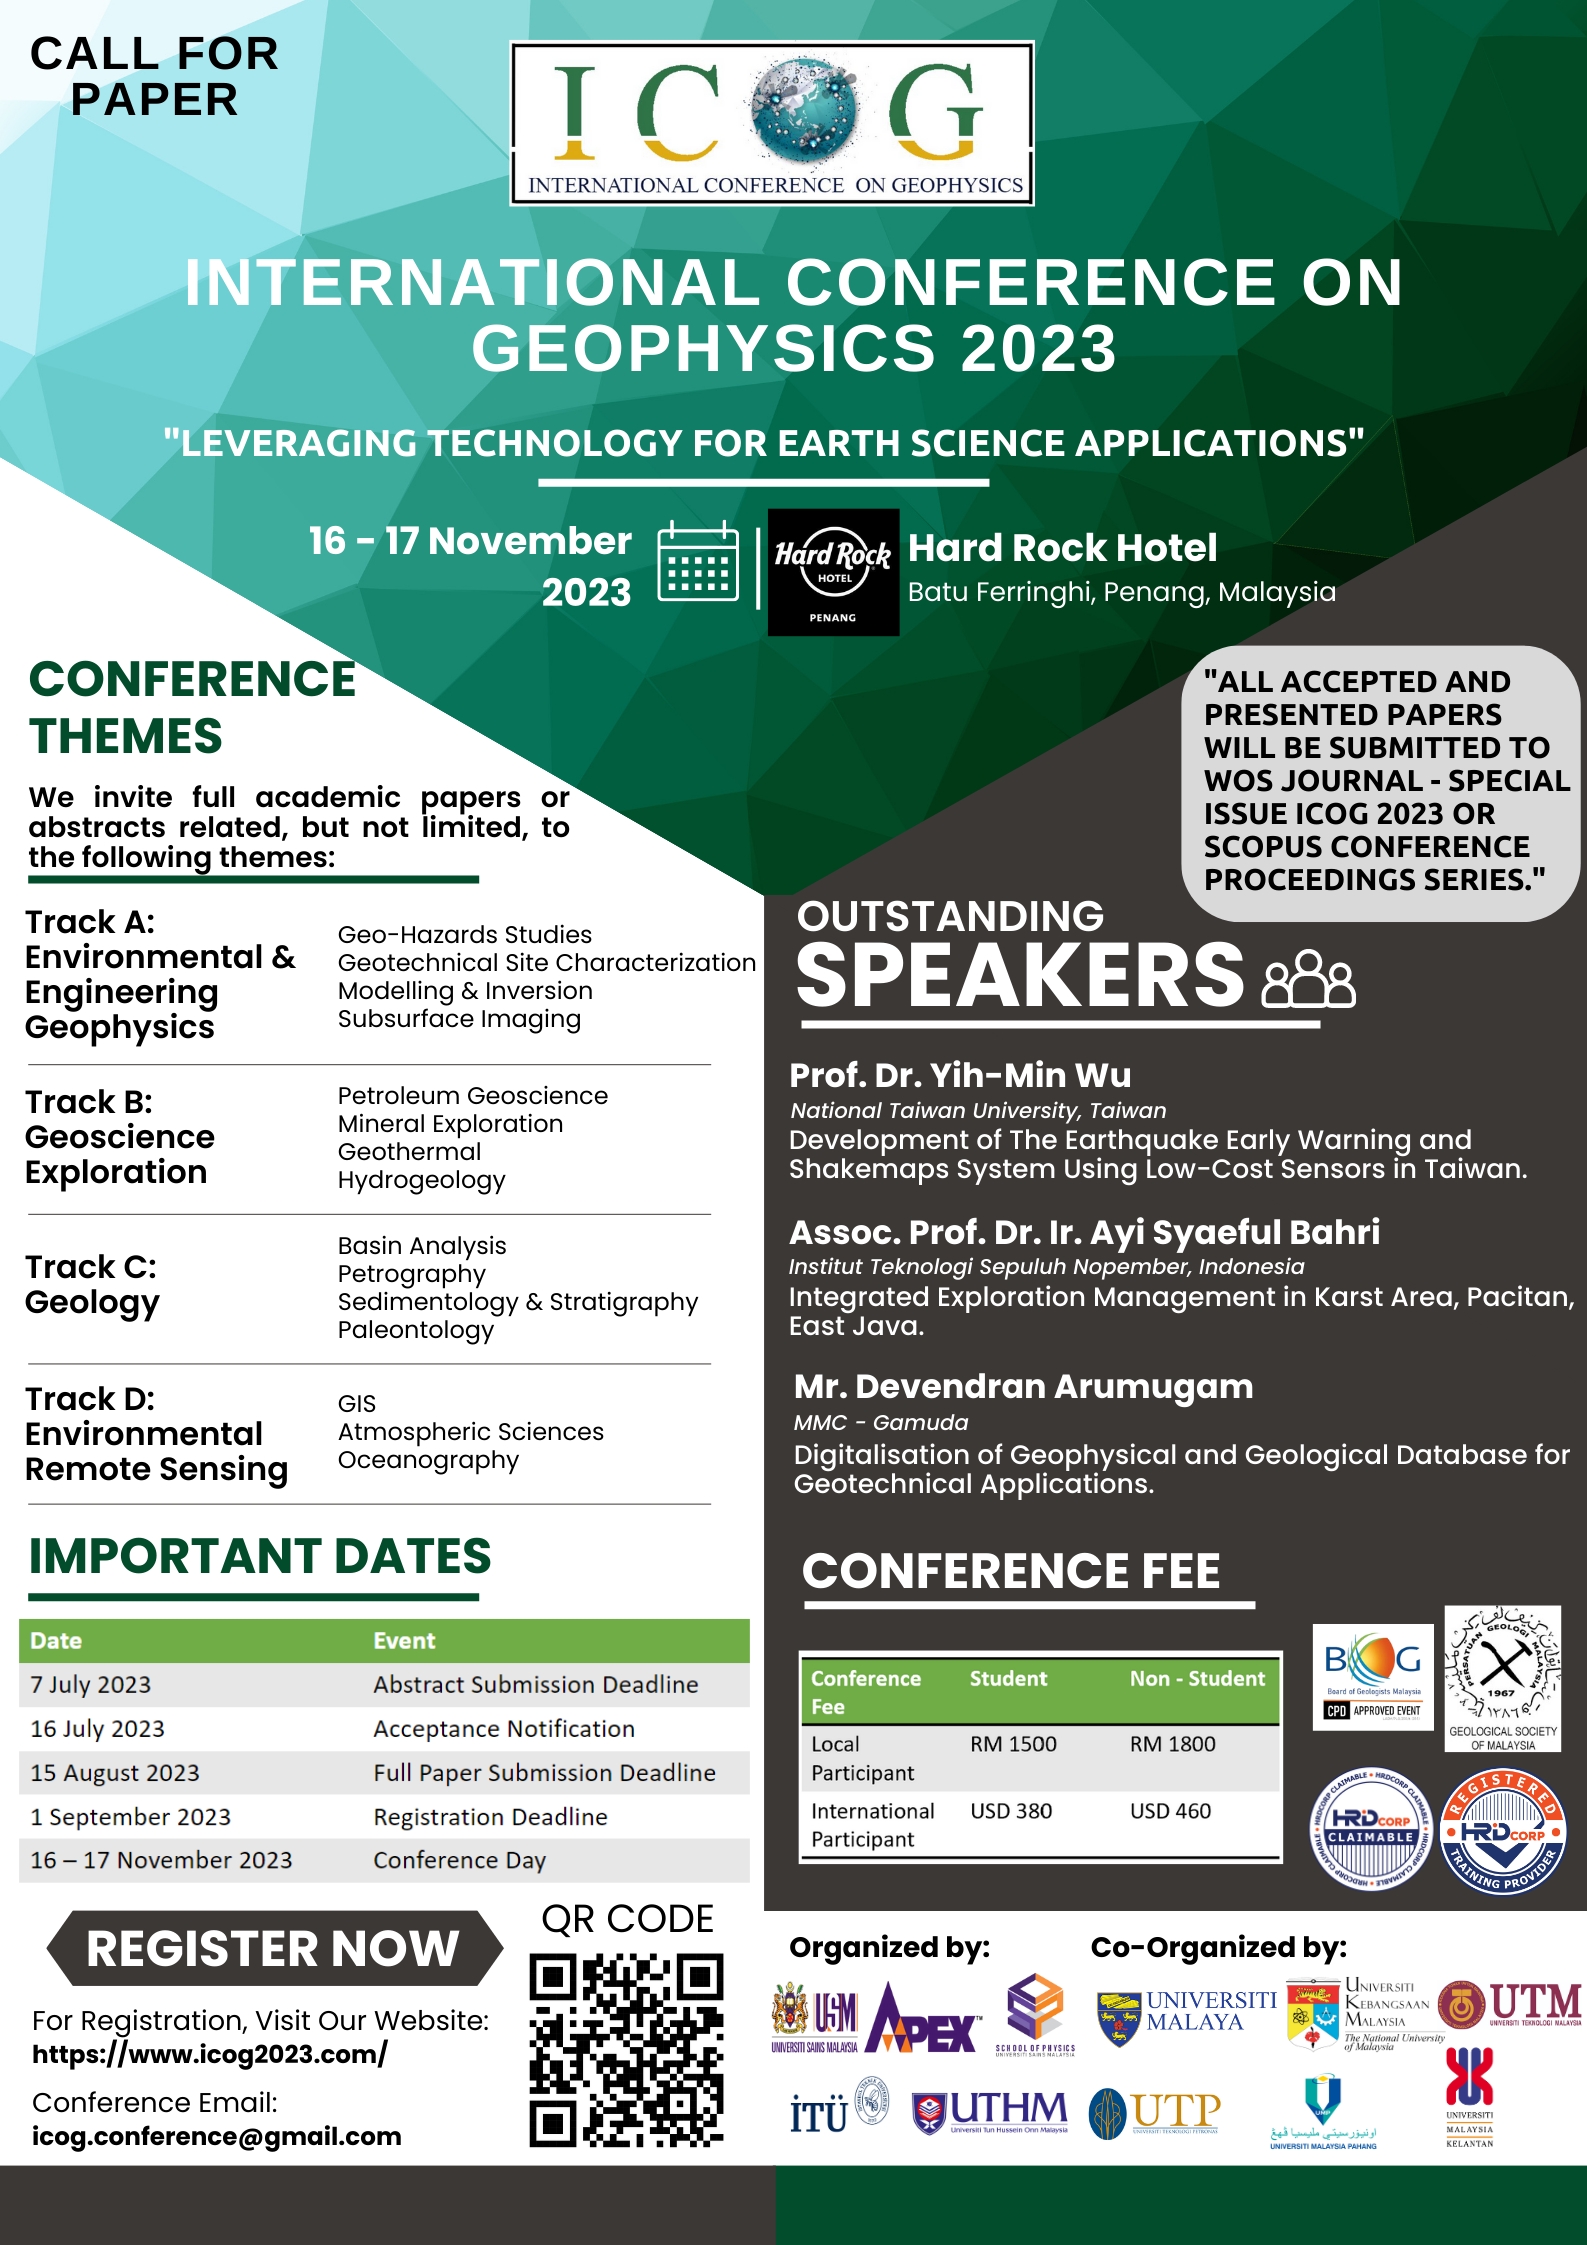 CALL FOR PAPERS INTERNATIONAL CONFERENCE ON GEOPHYSICS 2023 ICOG 2023